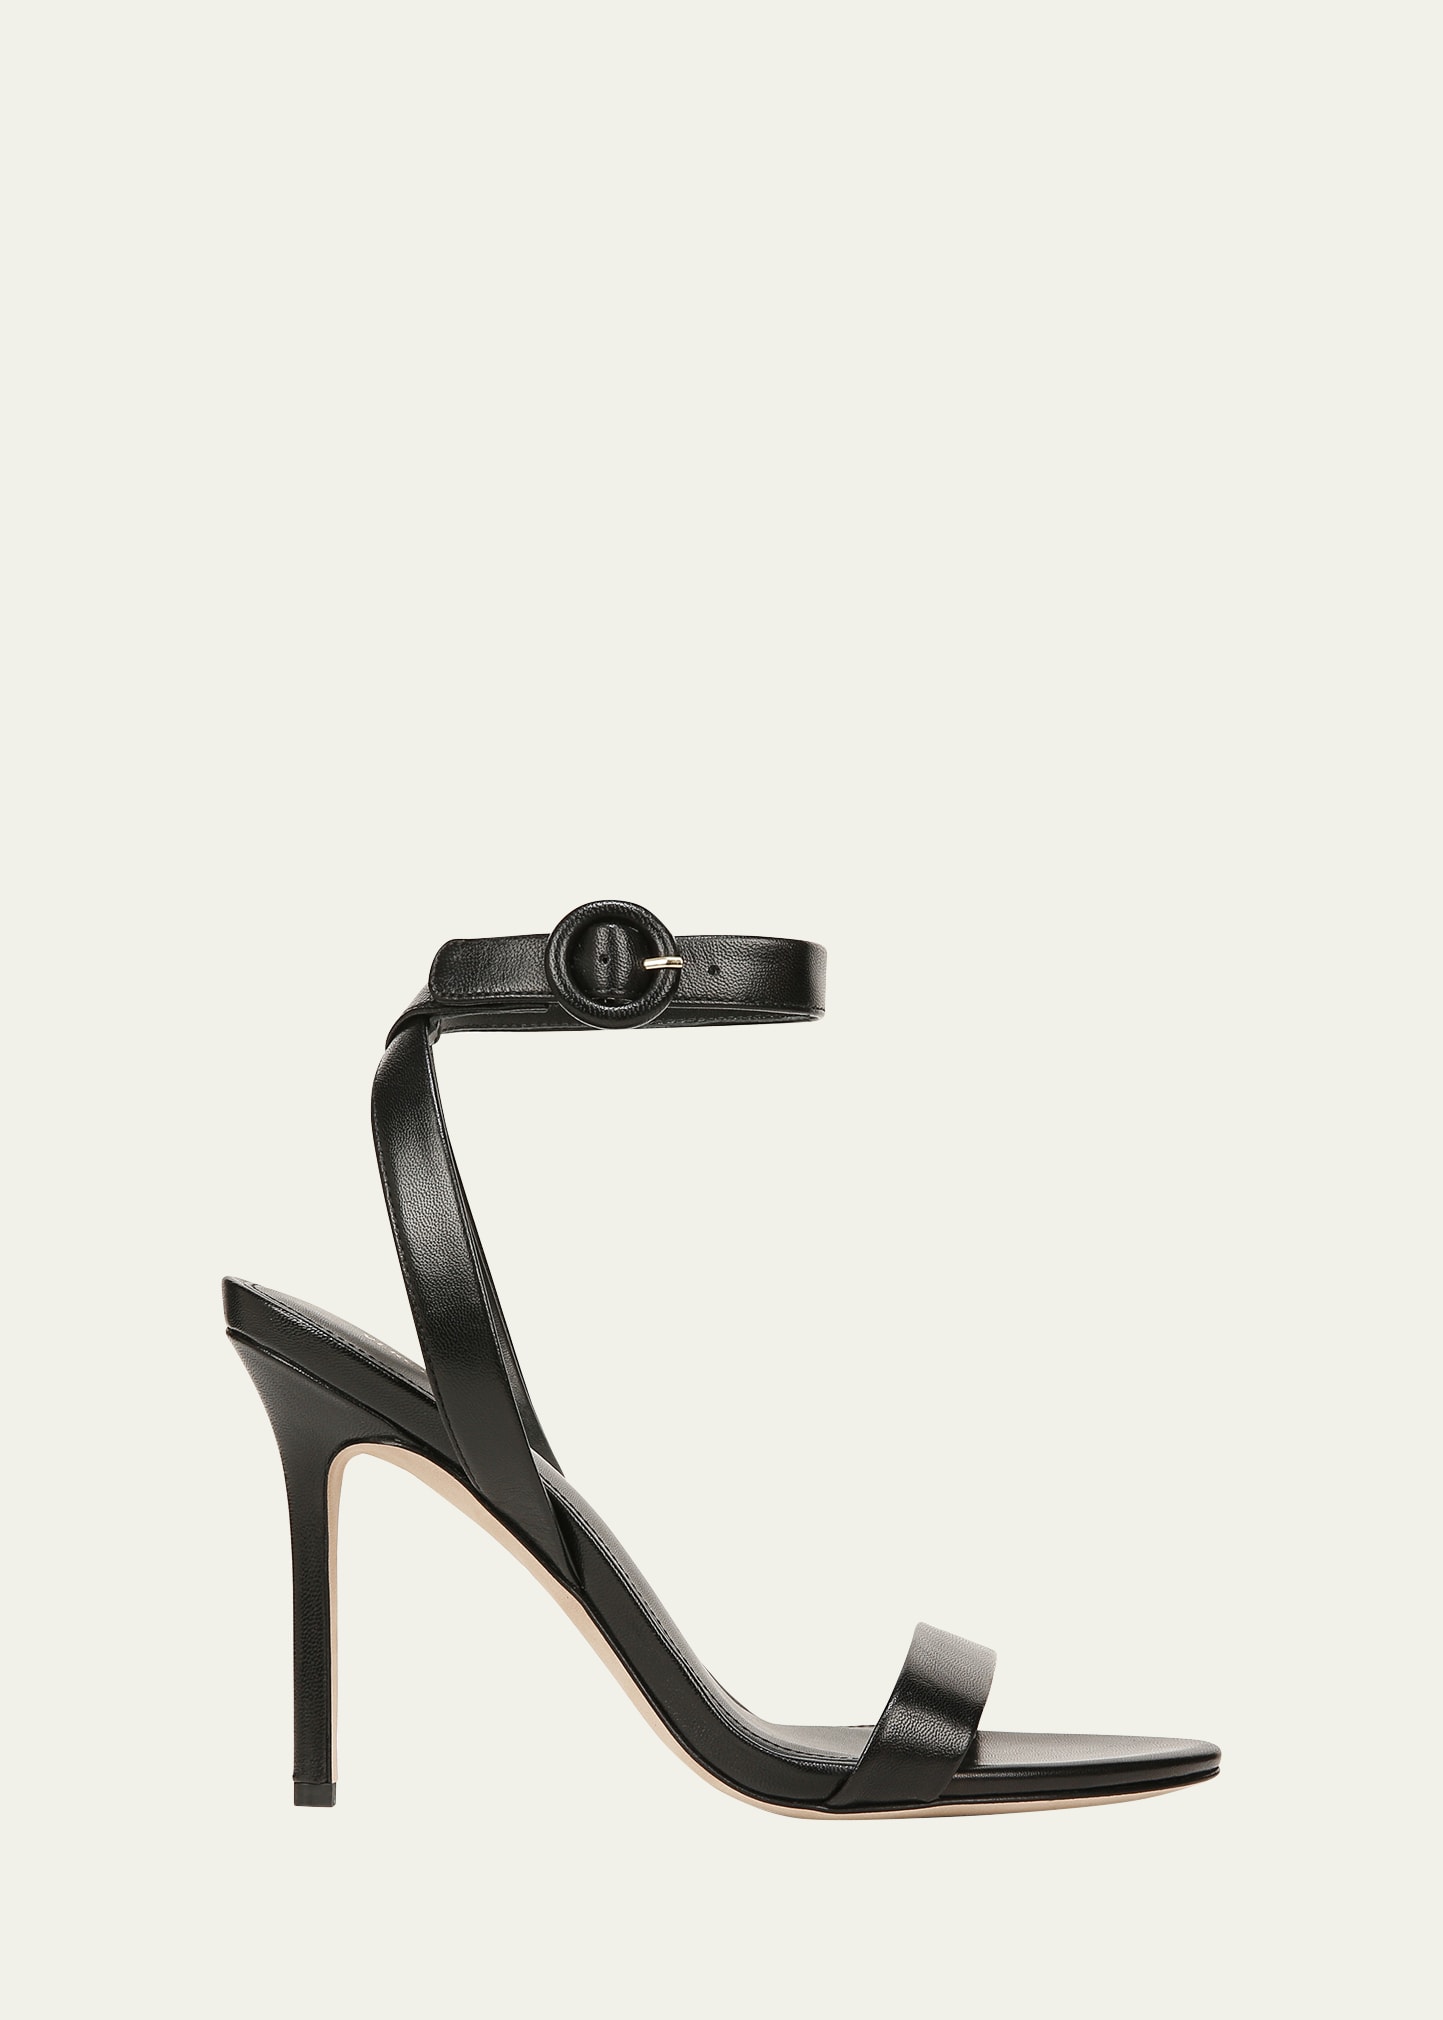 Veronica Beard Darcelle Leather Ankle-Strap Sandals